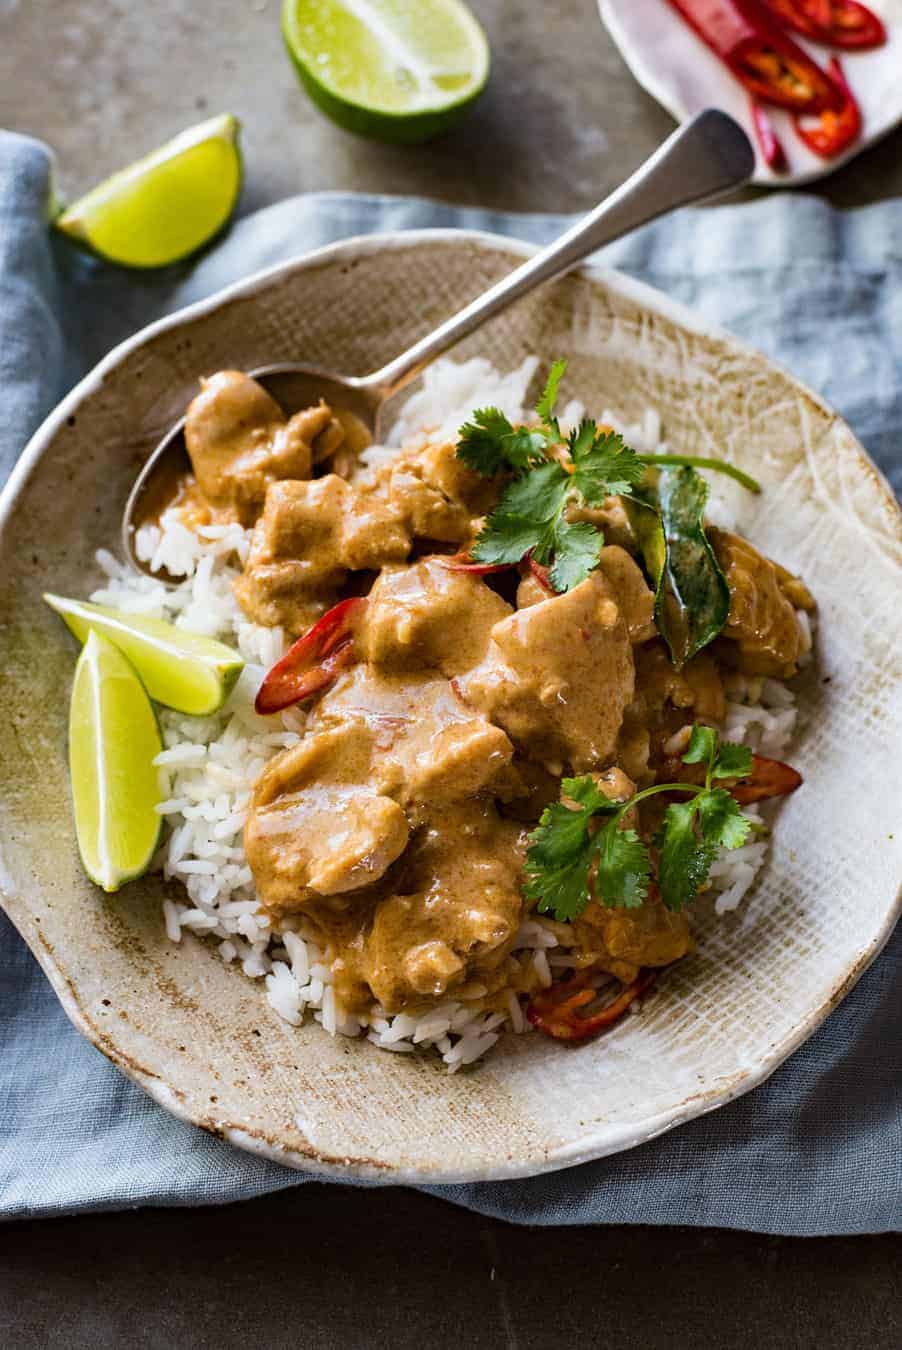 Thai Mango Chicken Curry - Restaurant quality, extra saucy, thick and creamy, 1/3 less calories, this Thai Red Curry is truly incredible.